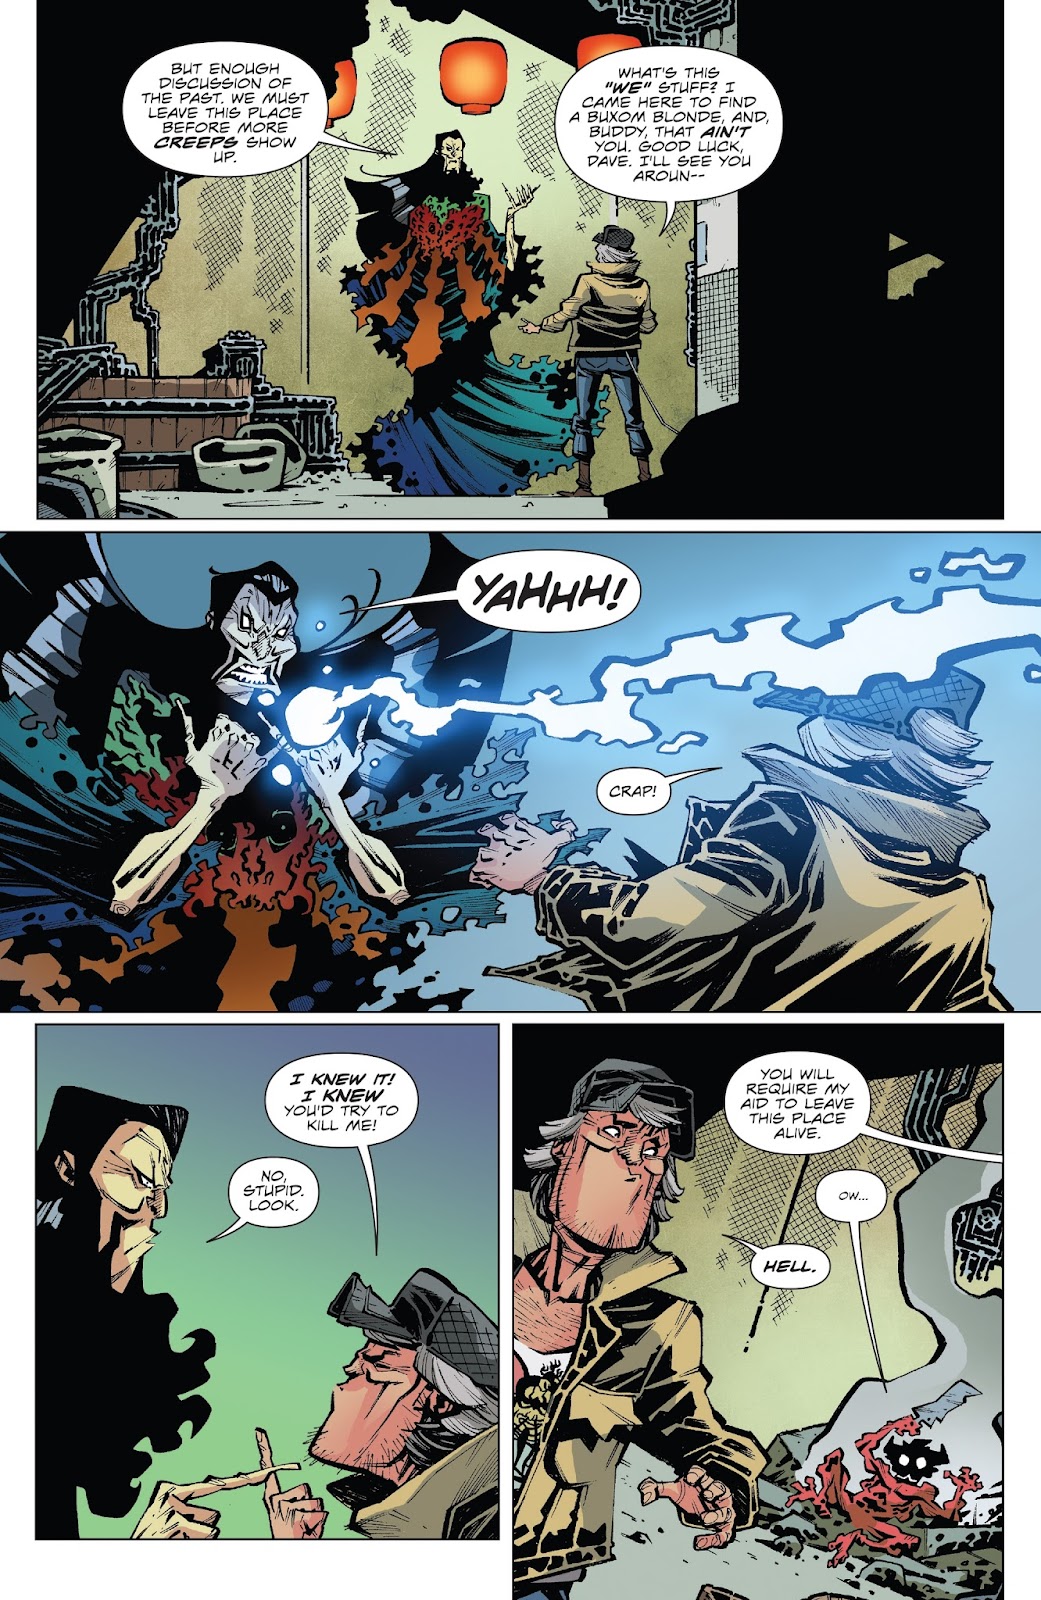 Big Trouble in Little China: Old Man Jack issue 2 - Page 8